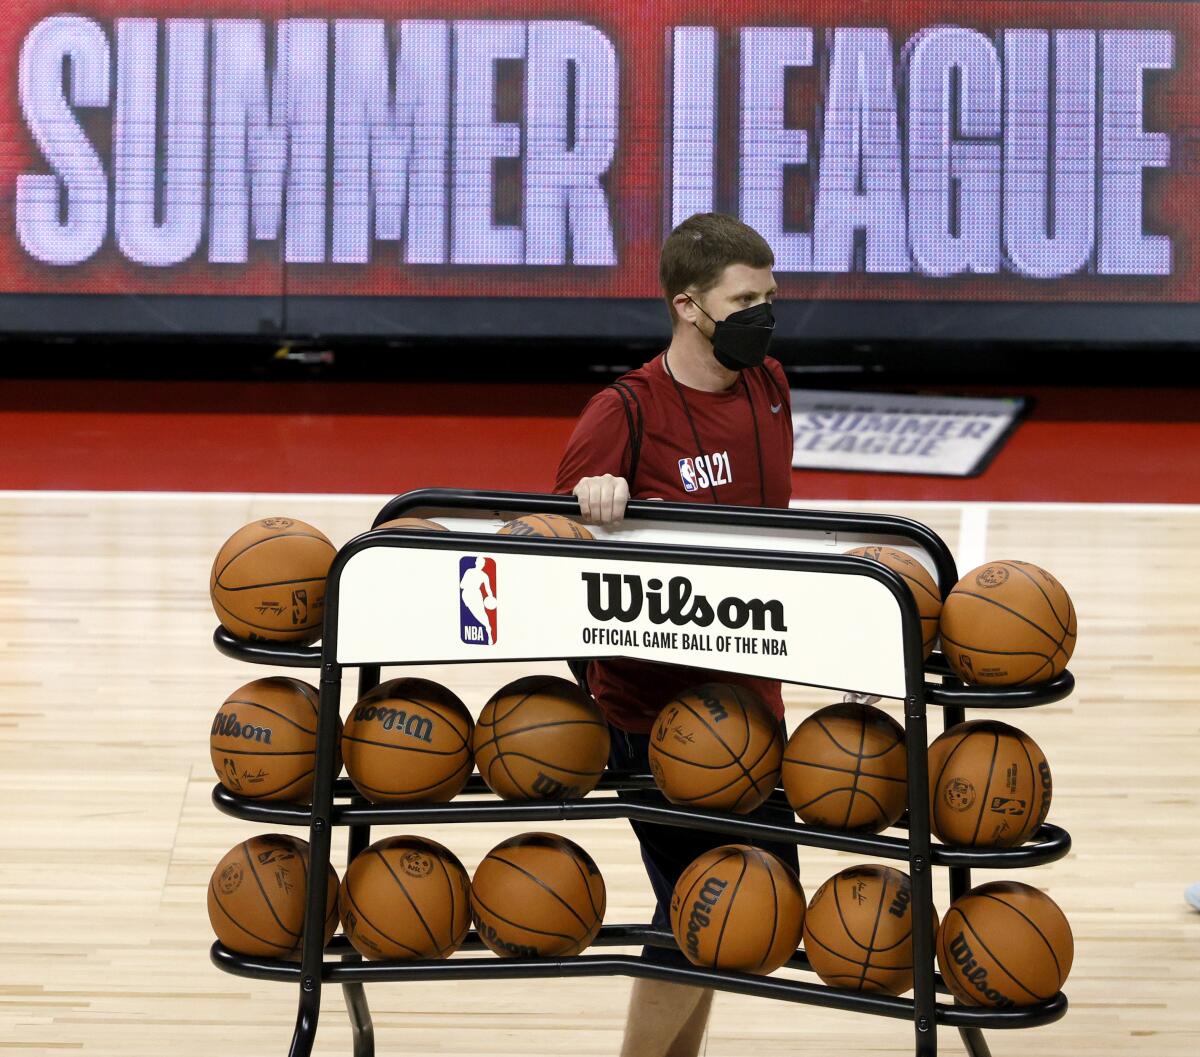 A rack of basketballs is wheeled off the court before Las Vegas Summer League game at the Thomas & Mack Center.